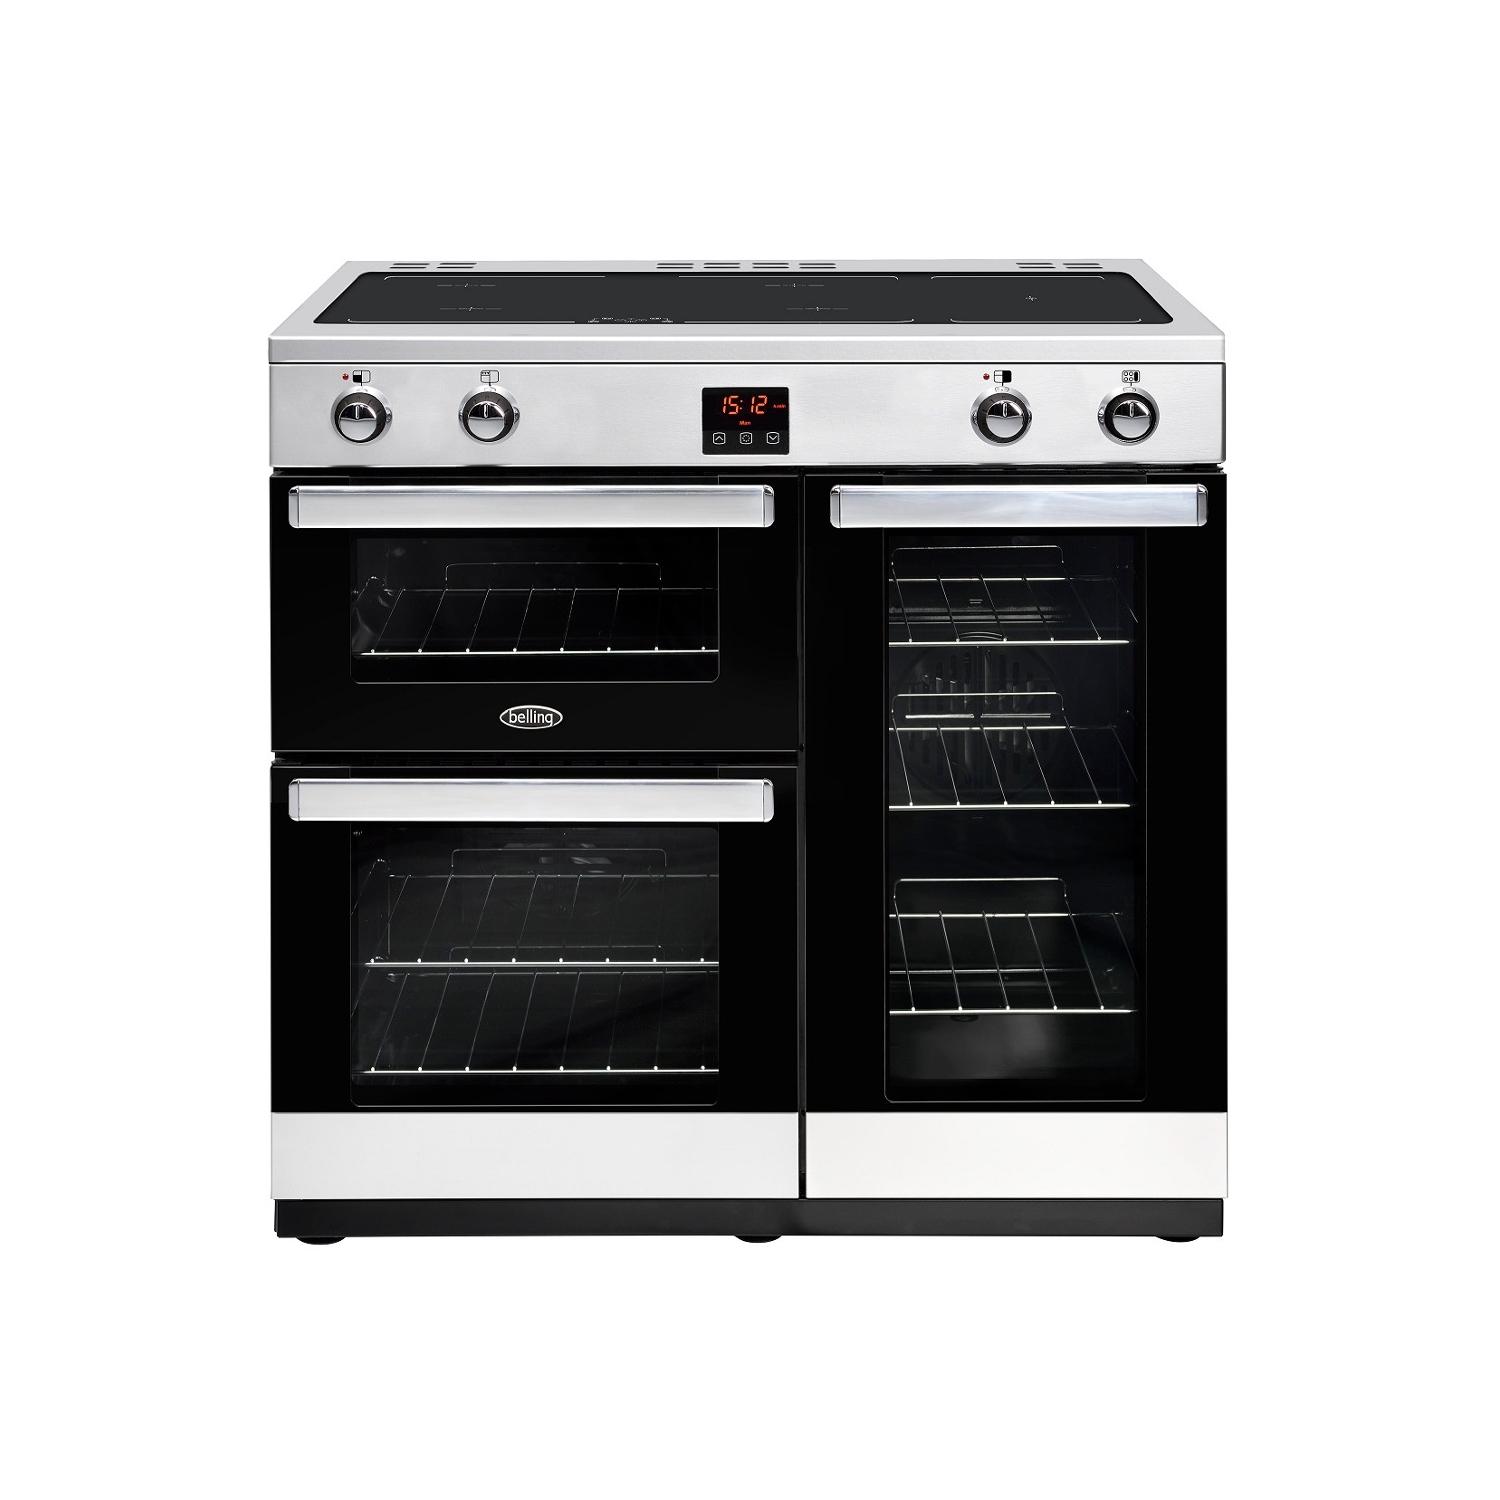 Belling Cookcentre 90Ei Stainless Steel 90cm Electric Induction Range Cooker - 0